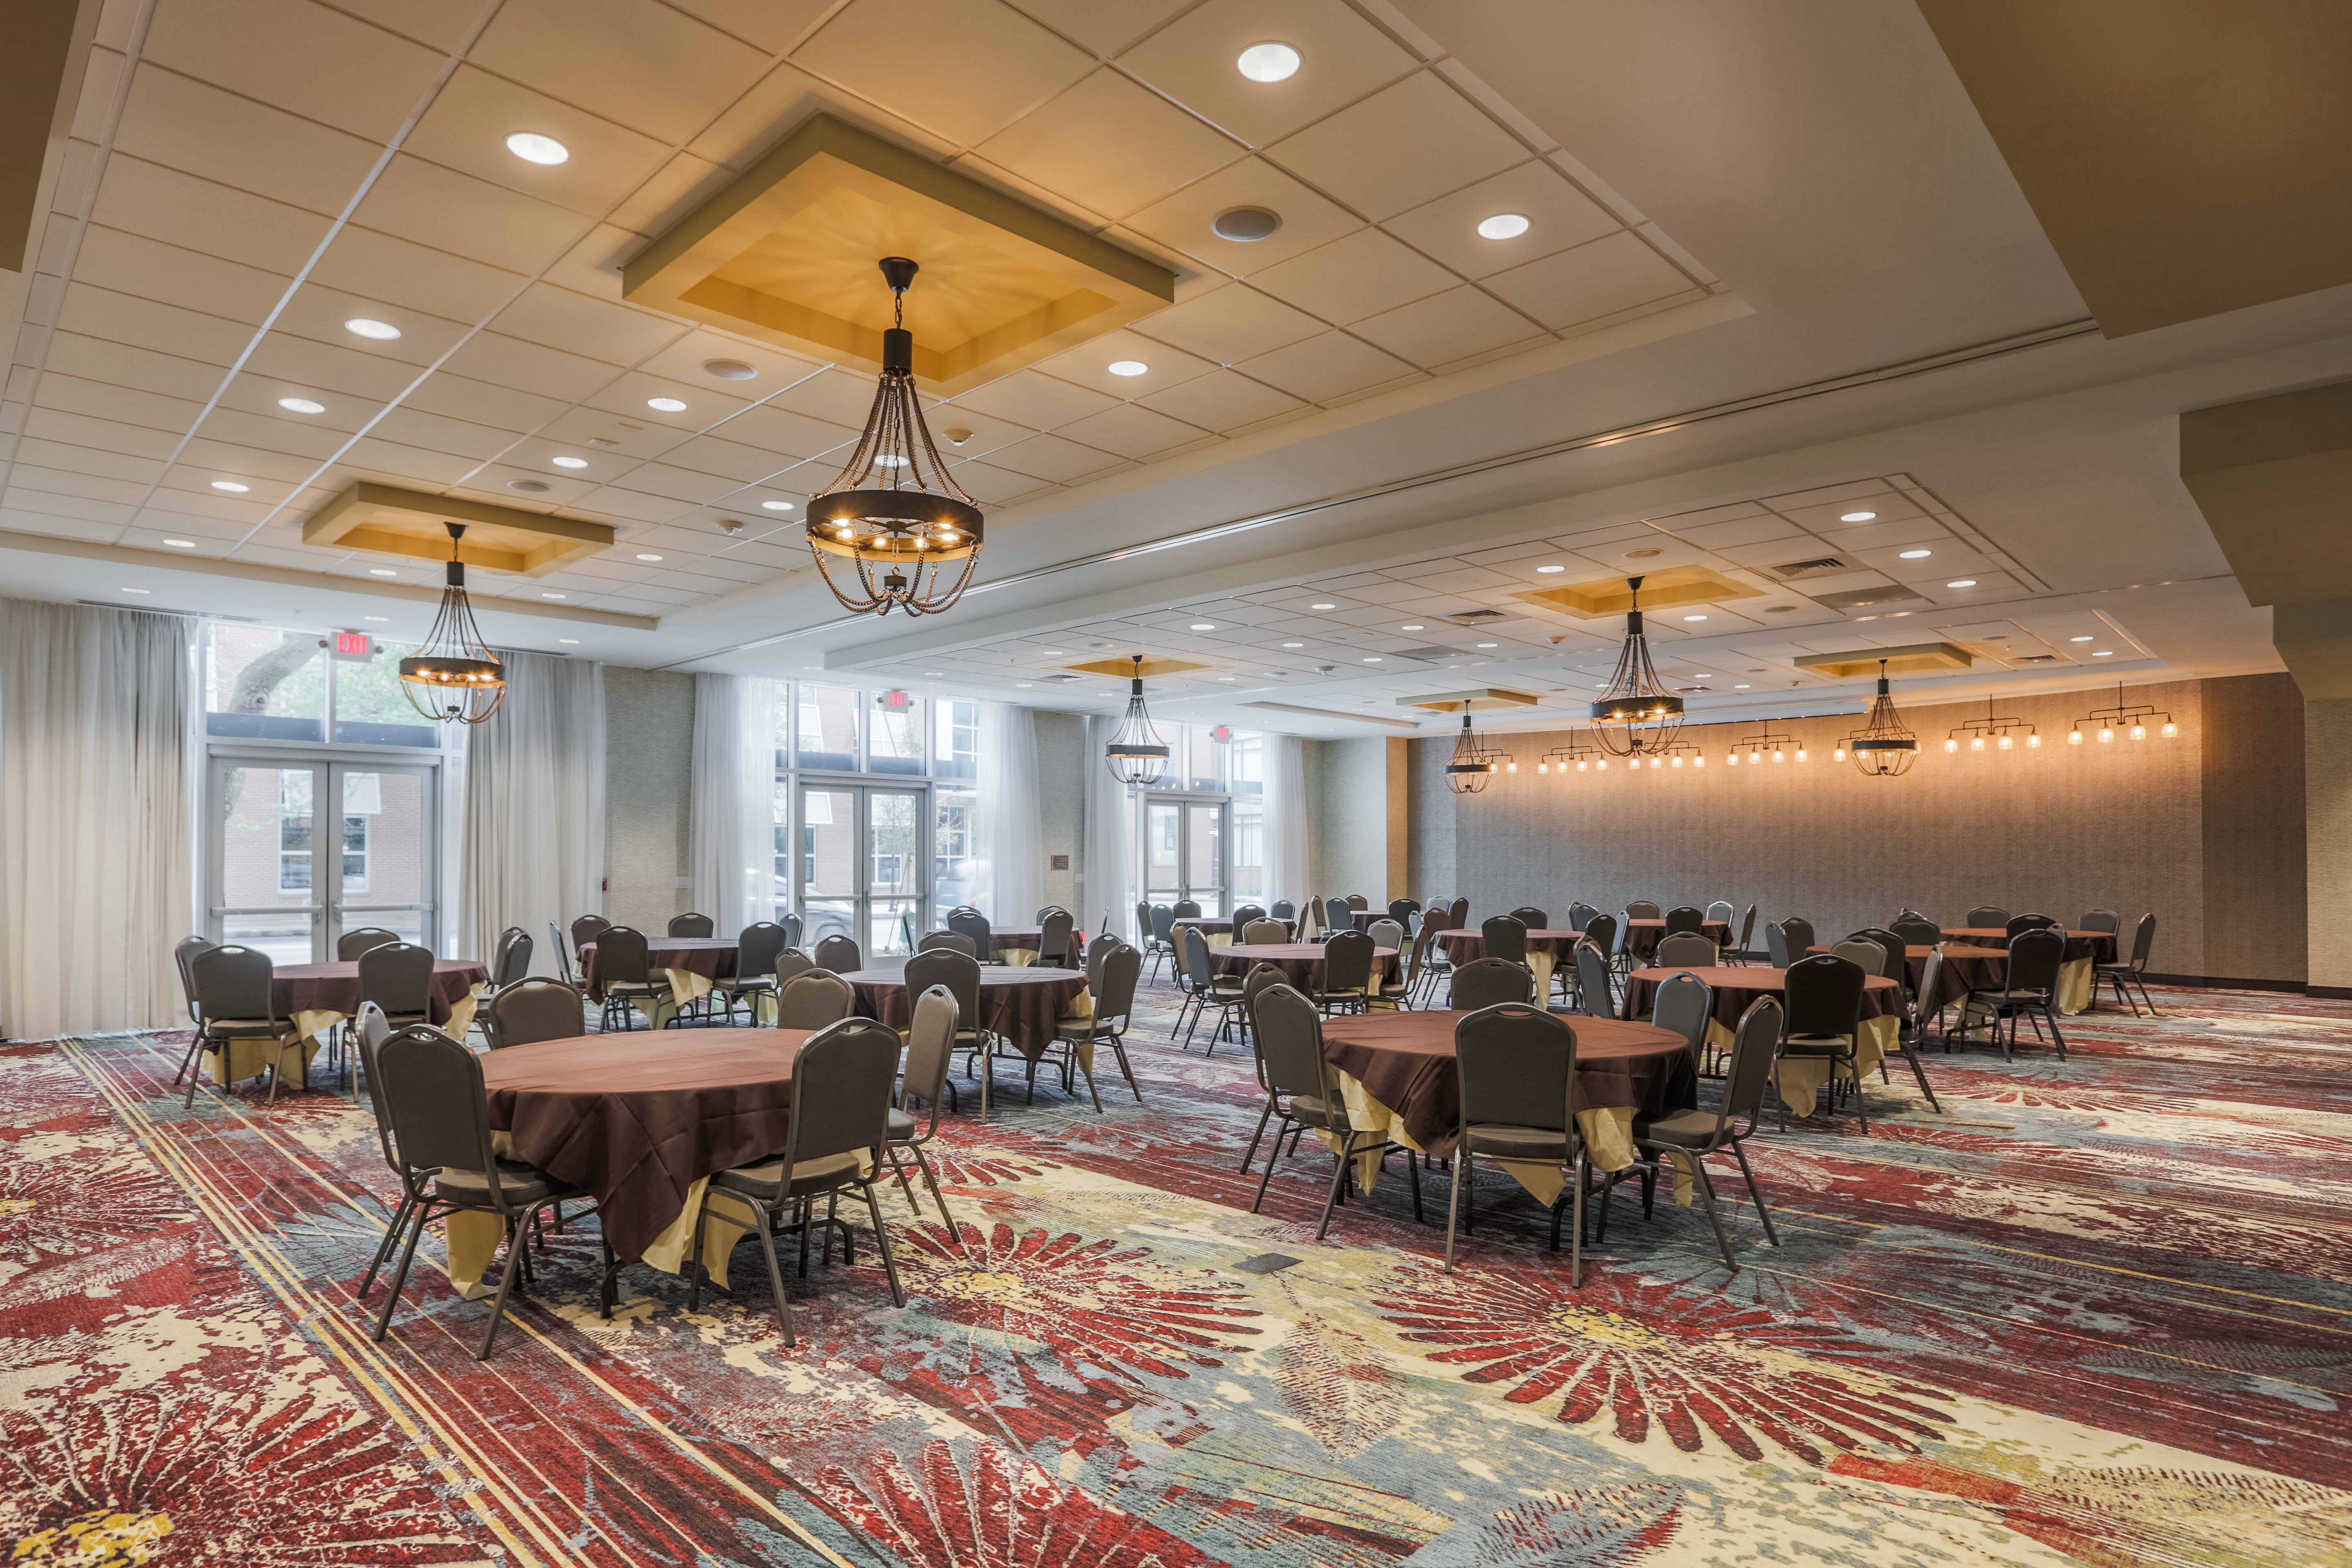 Ballroom and Event Space with Elegant Lighting Fixtures 